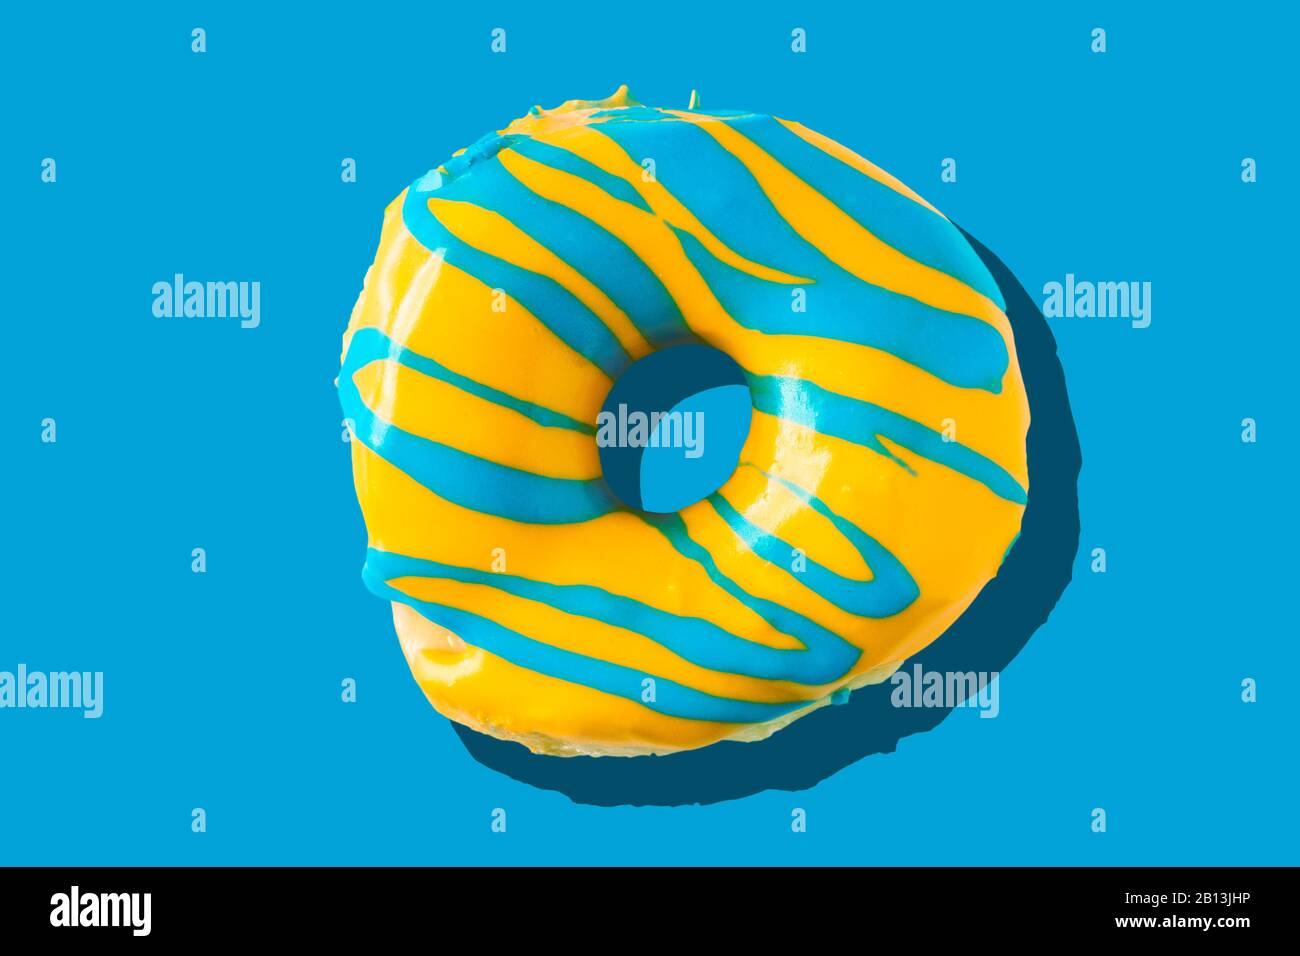 Colorful bright yellow and blue glazed  appetizing doughnut on bright blue  background. Top view of yummy looking donut. Stock Photo